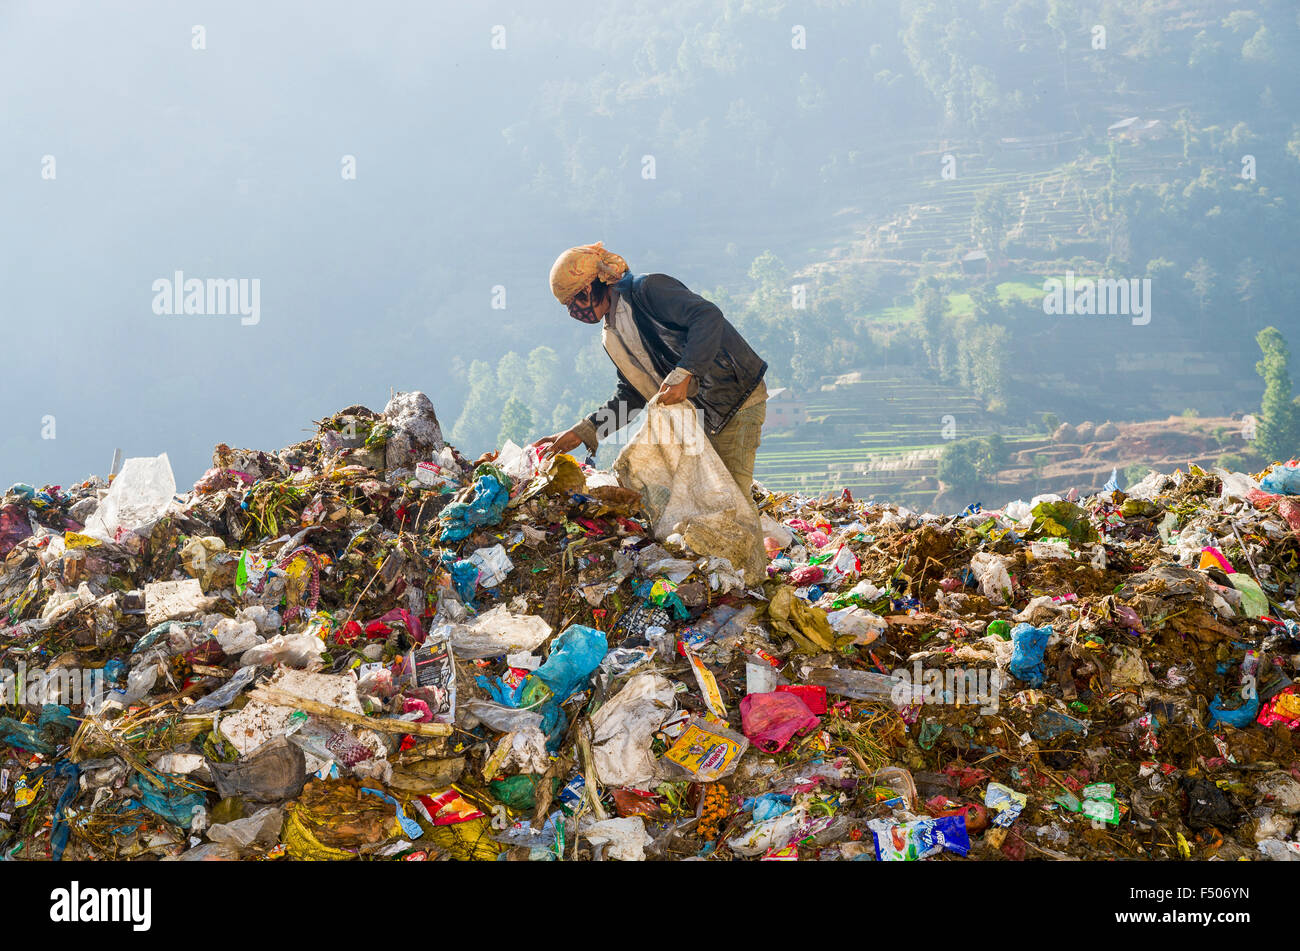 Woman sorting out garbage at Aletar garbage dump, earning 300-400 nepali rupees a day Stock Photo